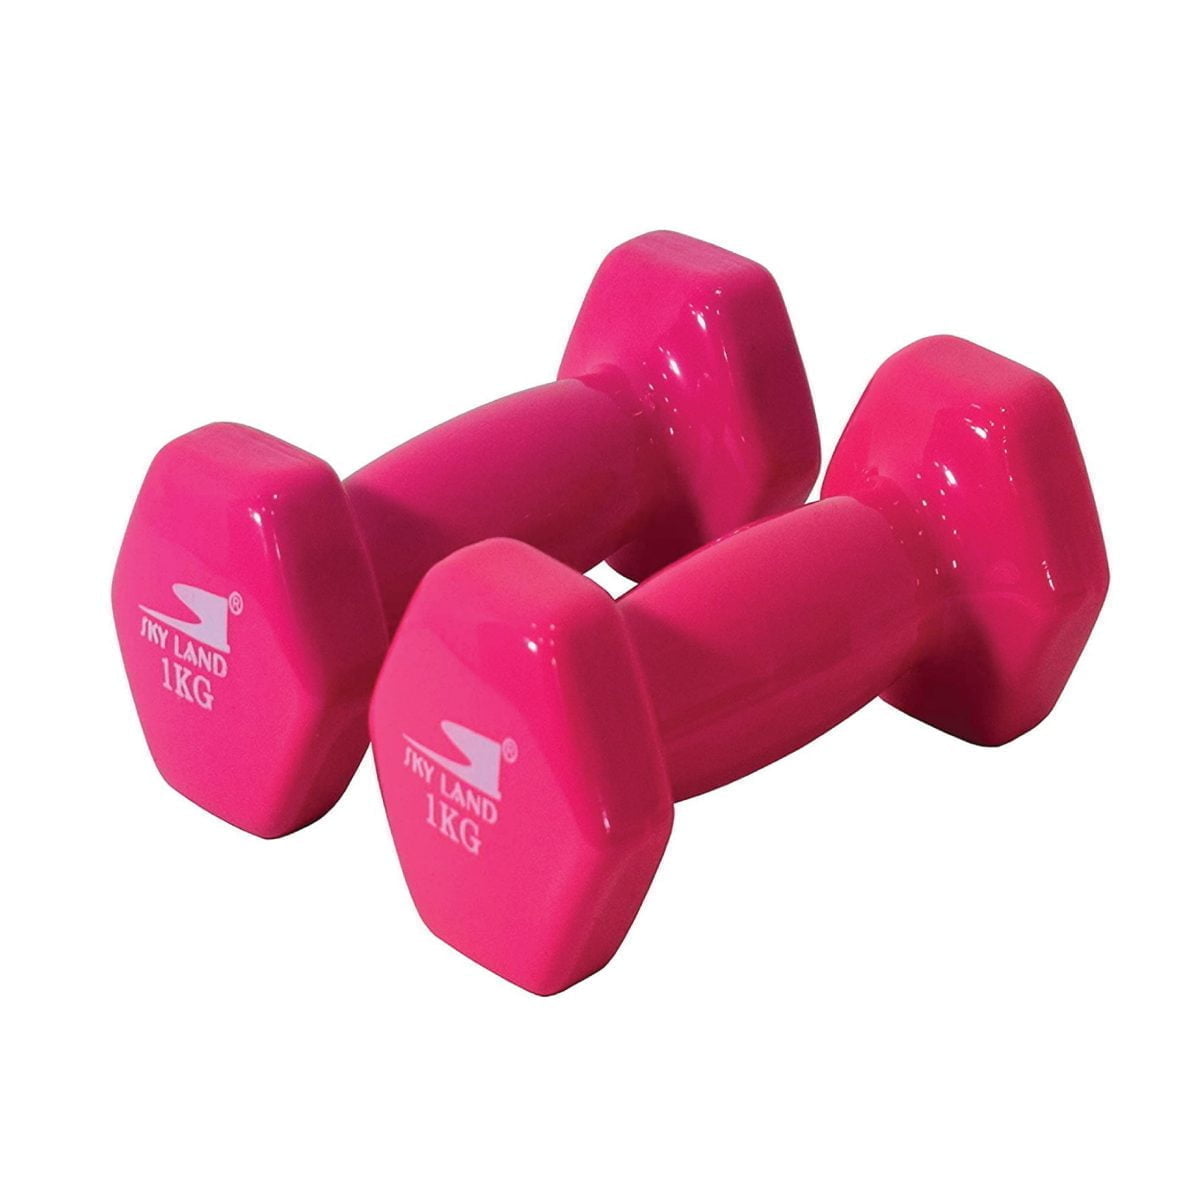 Axc 02 Scaled &Lt;H1&Gt;Deluxe Vinyl Dumbbell 2-Piece 1Kg&Lt;/H1&Gt; Deluxe Vinyl Dumbbell Constructed Of Heavy-Duty Solid Cast Iron Core To Add More Durability And Stability. Will Not Break Or Bend After Repeated Use. These Durable Hand Weights Are The Perfect Addition To Aerobics And Step Workouts, As Well As Any Standard Strength Training With Weights For Added Intensity And Resistance. Skyland Deluxe Vinyl Dumbbells -Em-9219R-3 Provides A Comfortable Feel To Handle And A Snug Grip For Sweaty Hands. Our Dumbbells Is A Great Assistant In A Wide Range Of Training And Fitness Exercises. Tone All Over Muscles, Lose More Weight And Enhance Your Body Strength By Using It To Perform Curls, Triceps Extension And Bench Press Or Shoulder Press Or Simply Use It When You Walk Or Do Aerobics Exercises To Add More Weight And Thus Improve Your Core Strength. Deluxe Vinyl Dumbbell 2-Piece 1Kg Deluxe Vinyl Dumbbell 2-Piece 1Kg